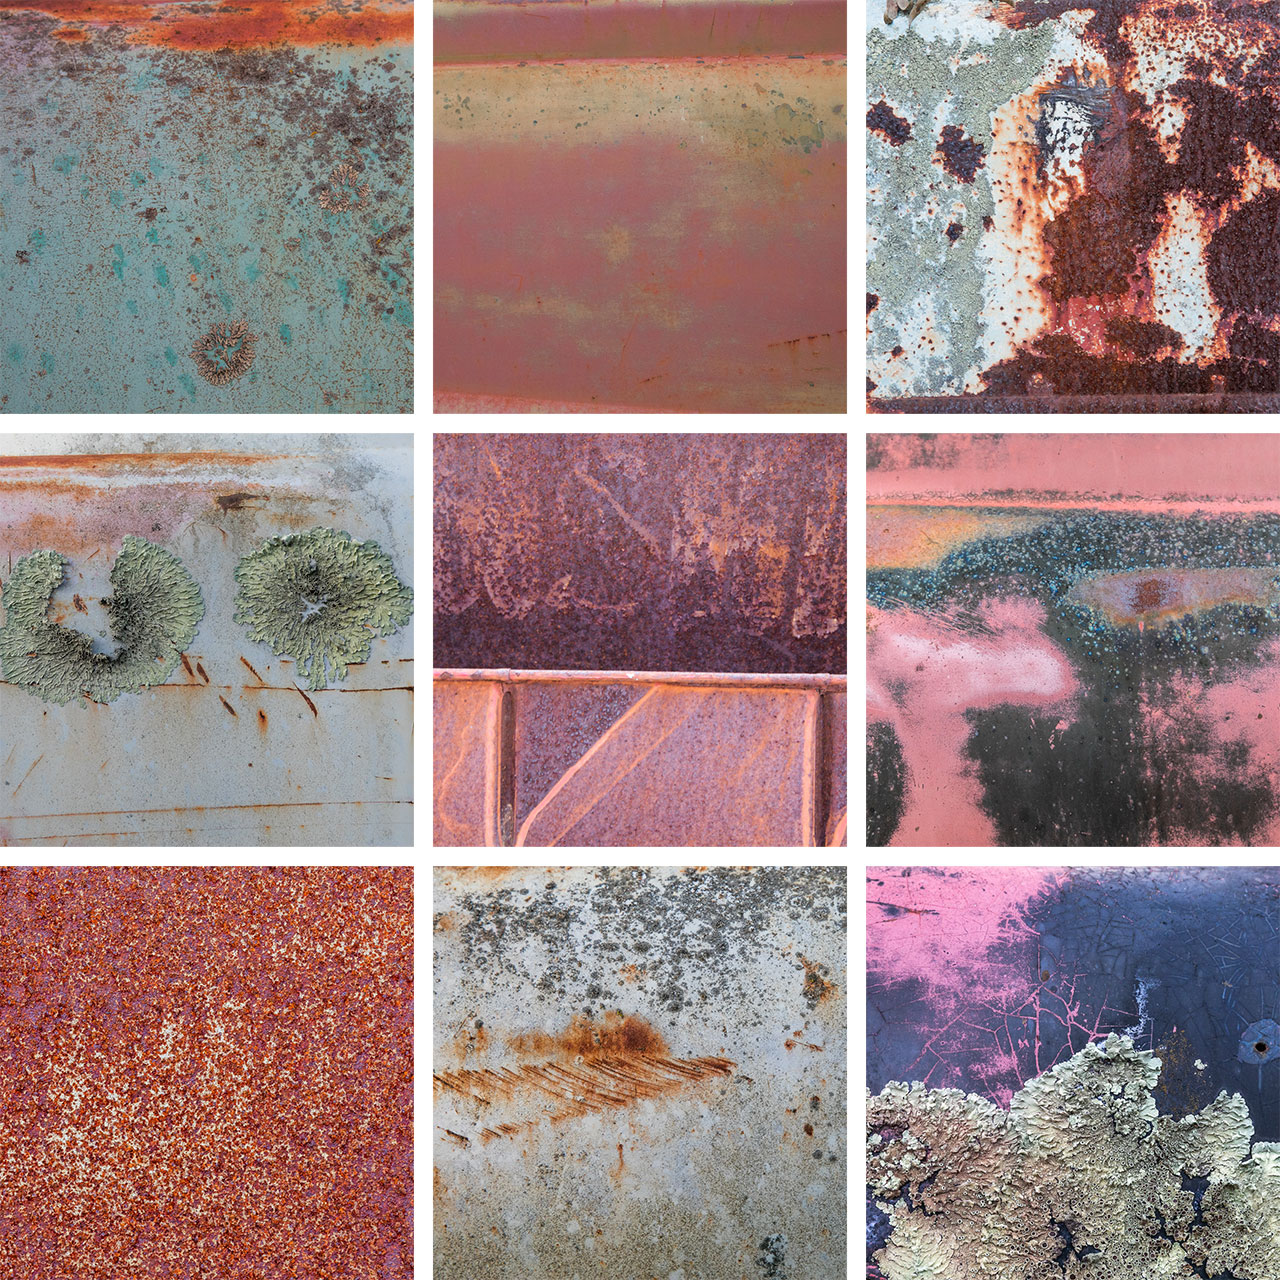 Textures and patterns in the rust and paint of old vehicles abandoned in the bush